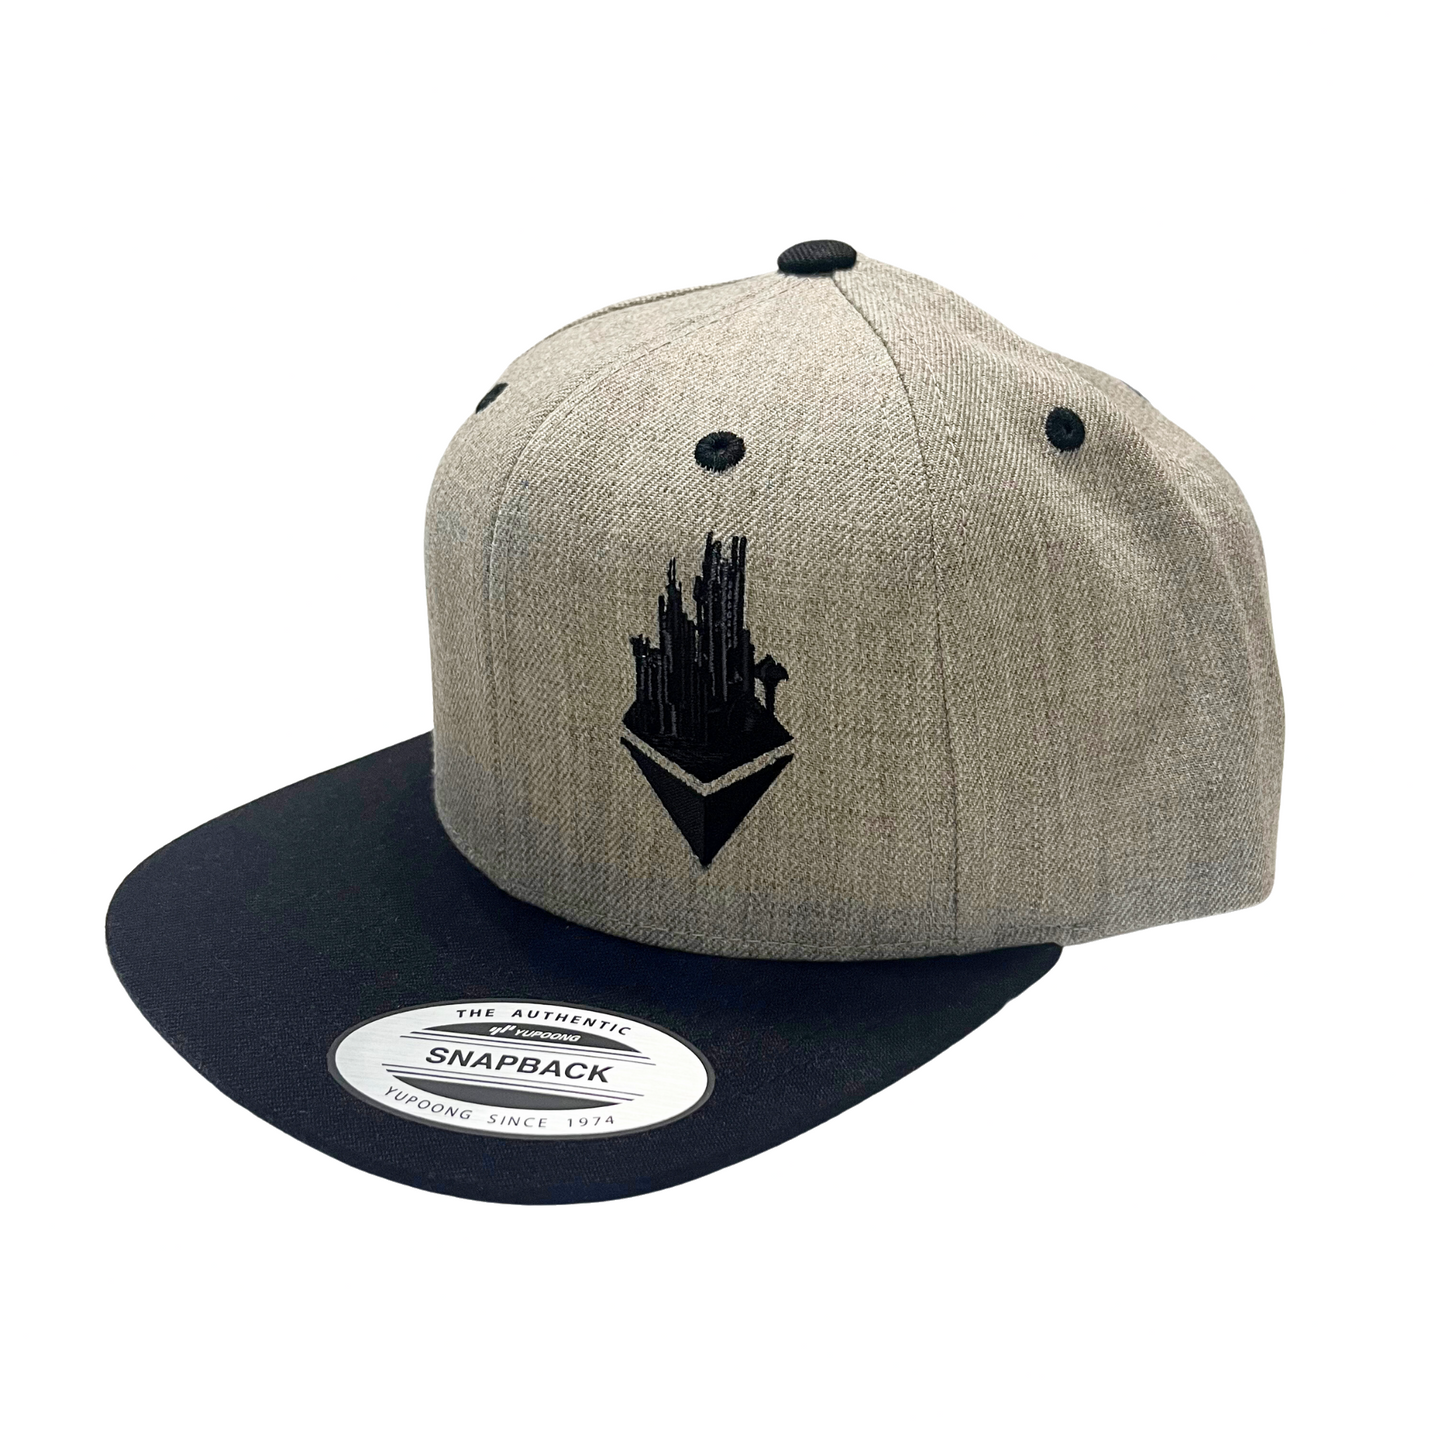 Ethereum Towers "1 Year Anniversary" Yupoong® Embroidered  Snapback Hat and Exclusive Anniversary Box